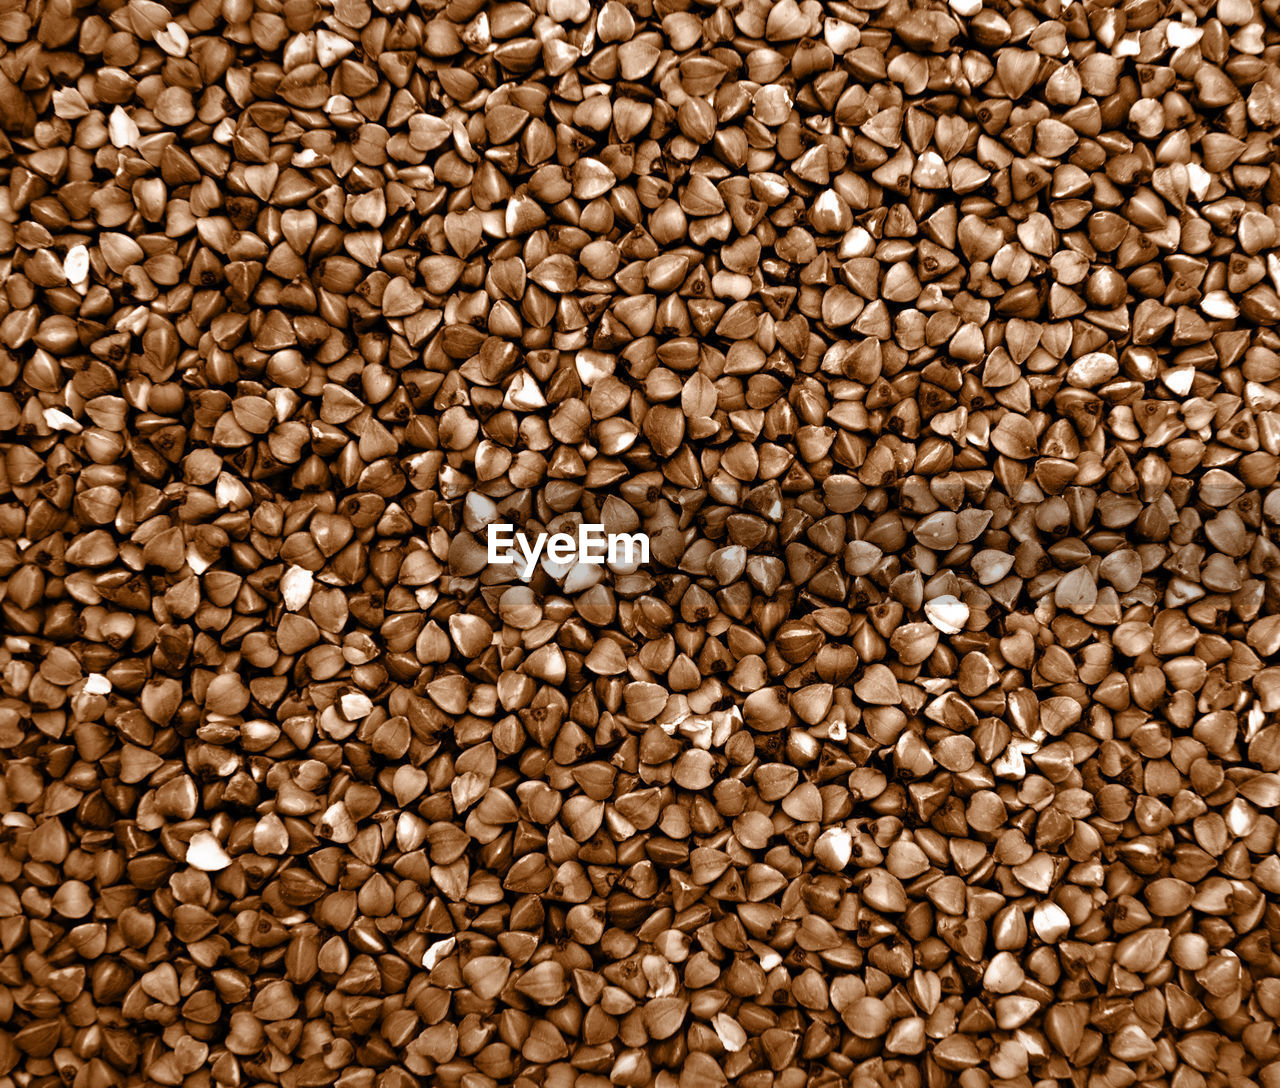 FULL FRAME SHOT OF COFFEE BEANS IN CONTAINER